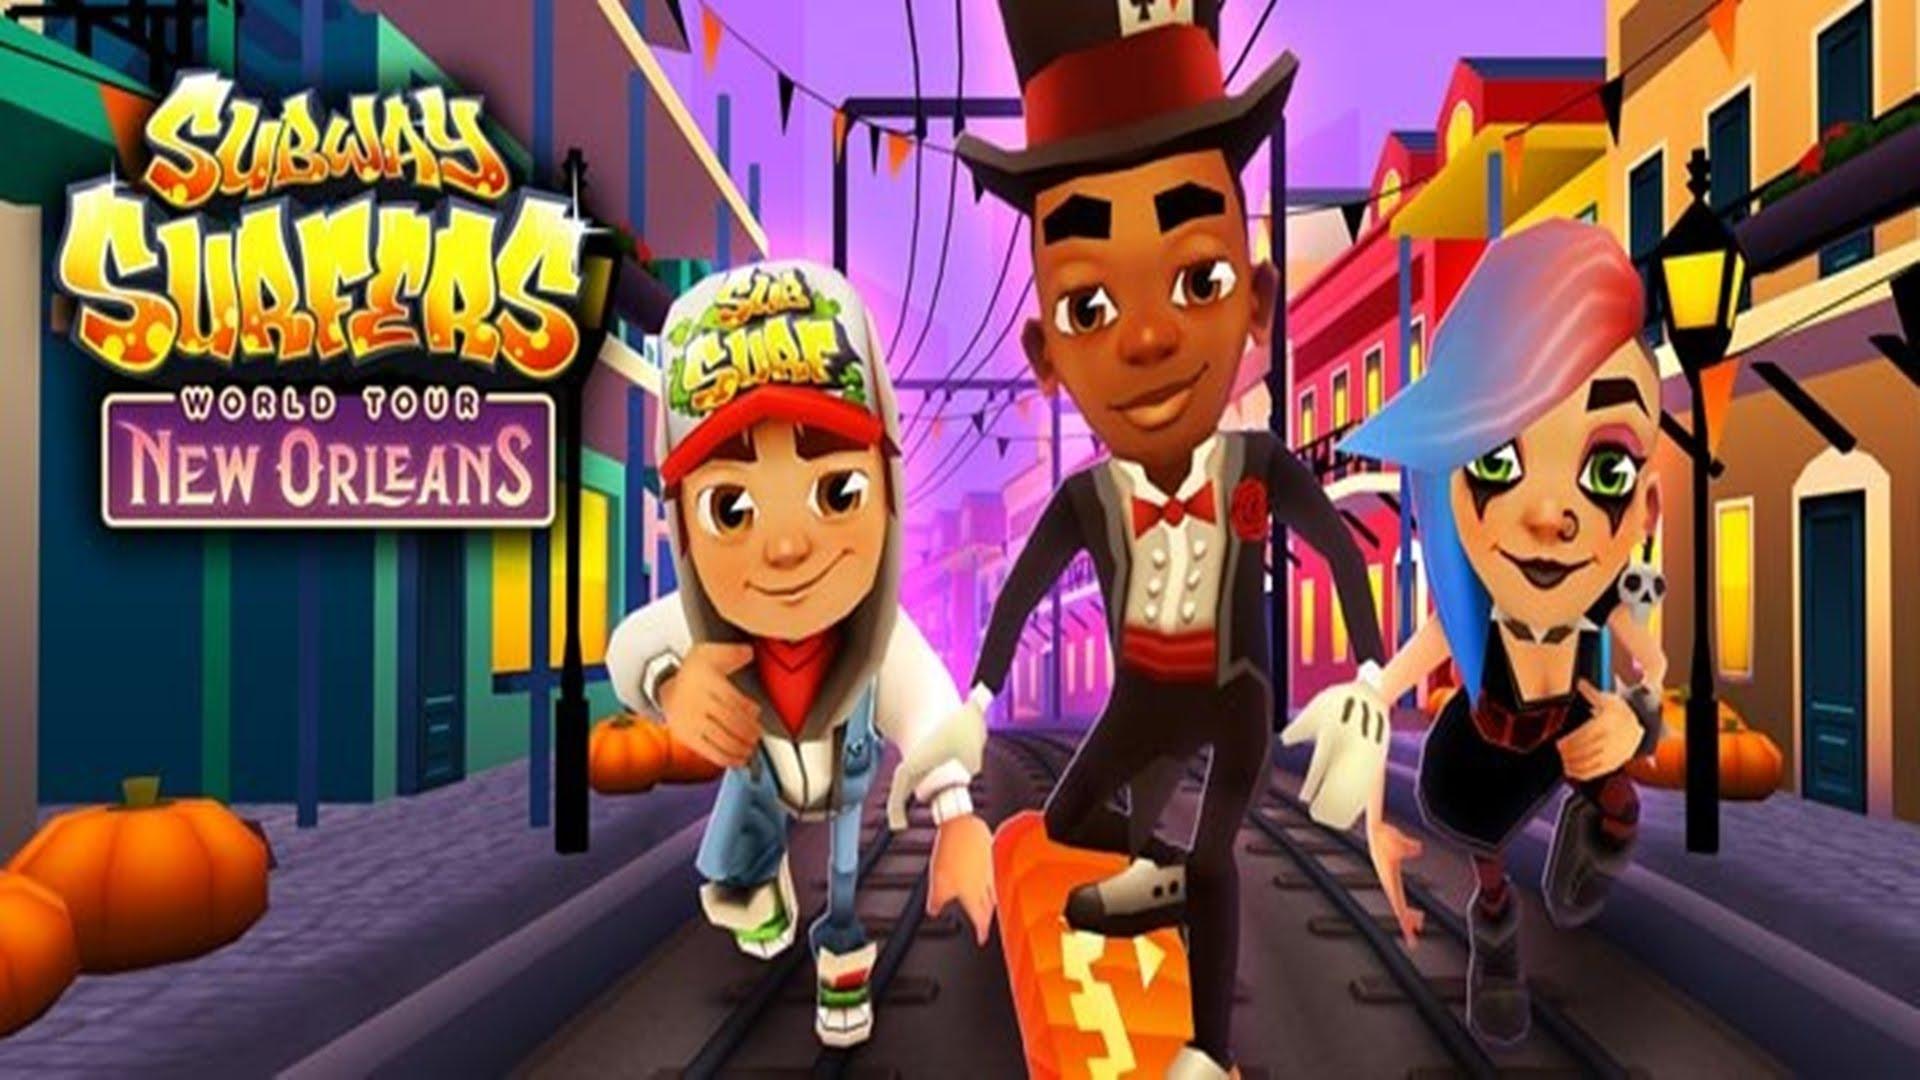 Subway Surfers: New Orleans Xperia Z2 Gameplay